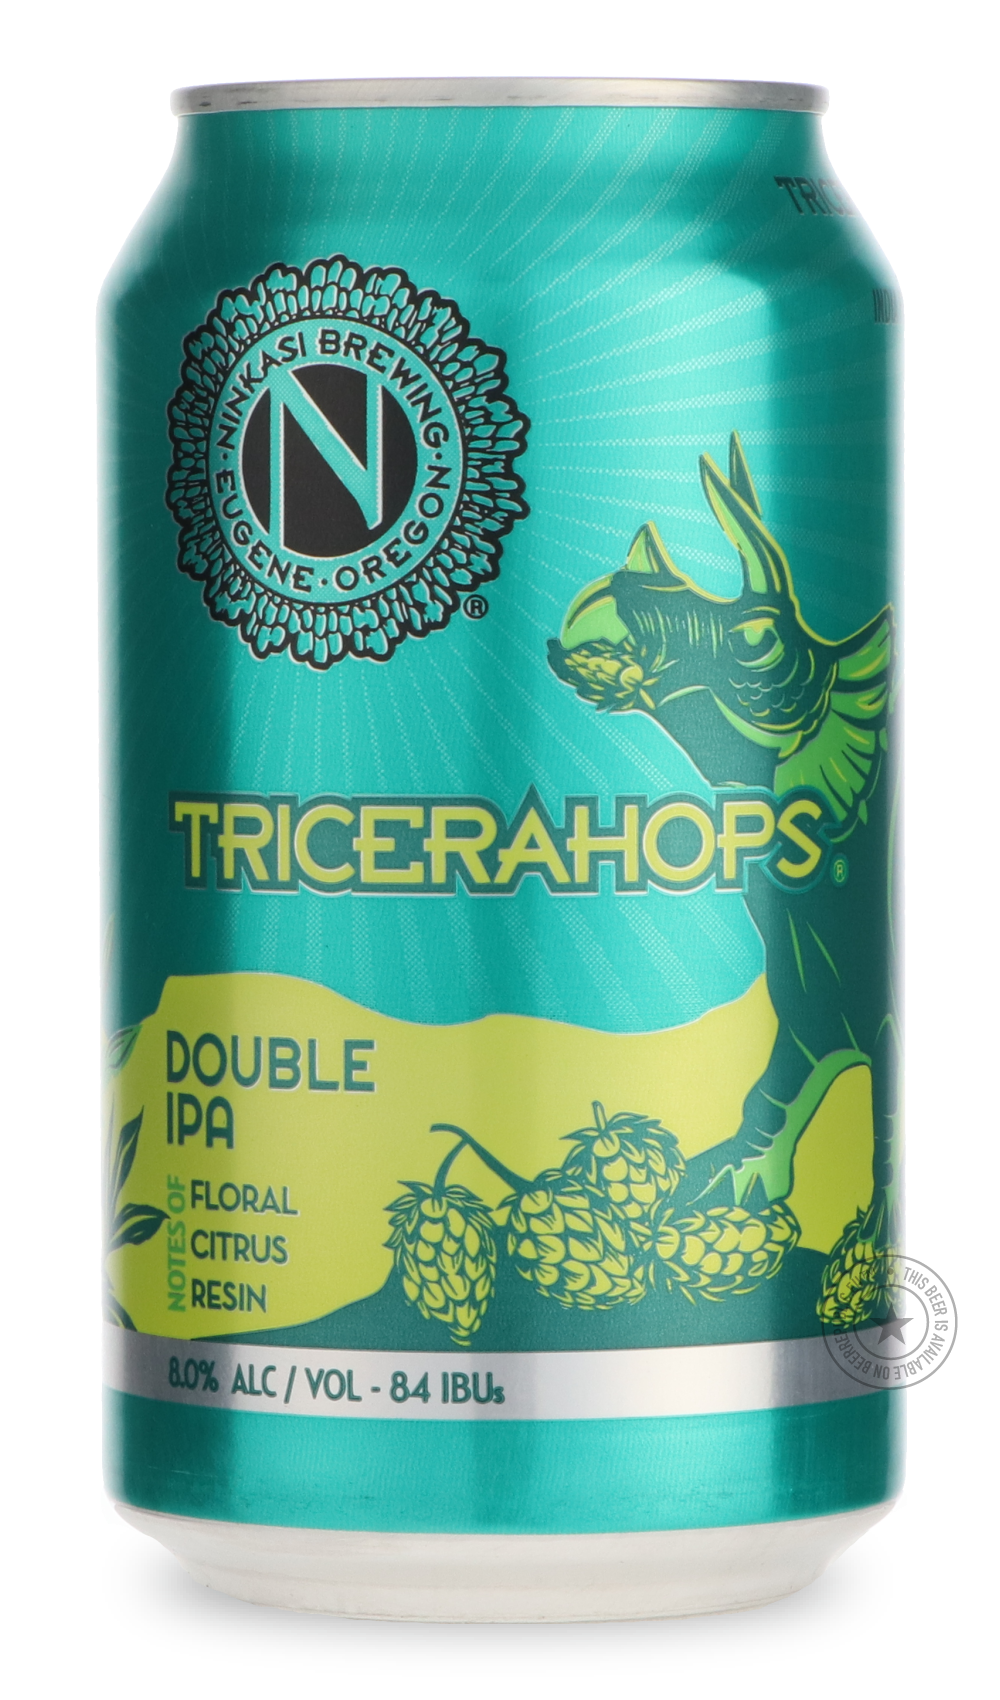 -Ninkasi- Tricerahops-IPA- Only @ Beer Republic - The best online beer store for American & Canadian craft beer - Buy beer online from the USA and Canada - Bier online kopen - Amerikaans bier kopen - Craft beer store - Craft beer kopen - Amerikanisch bier kaufen - Bier online kaufen - Acheter biere online - IPA - Stout - Porter - New England IPA - Hazy IPA - Imperial Stout - Barrel Aged - Barrel Aged Imperial Stout - Brown - Dark beer - Blond - Blonde - Pilsner - Lager - Wheat - Weizen - Amber - Barley Wine